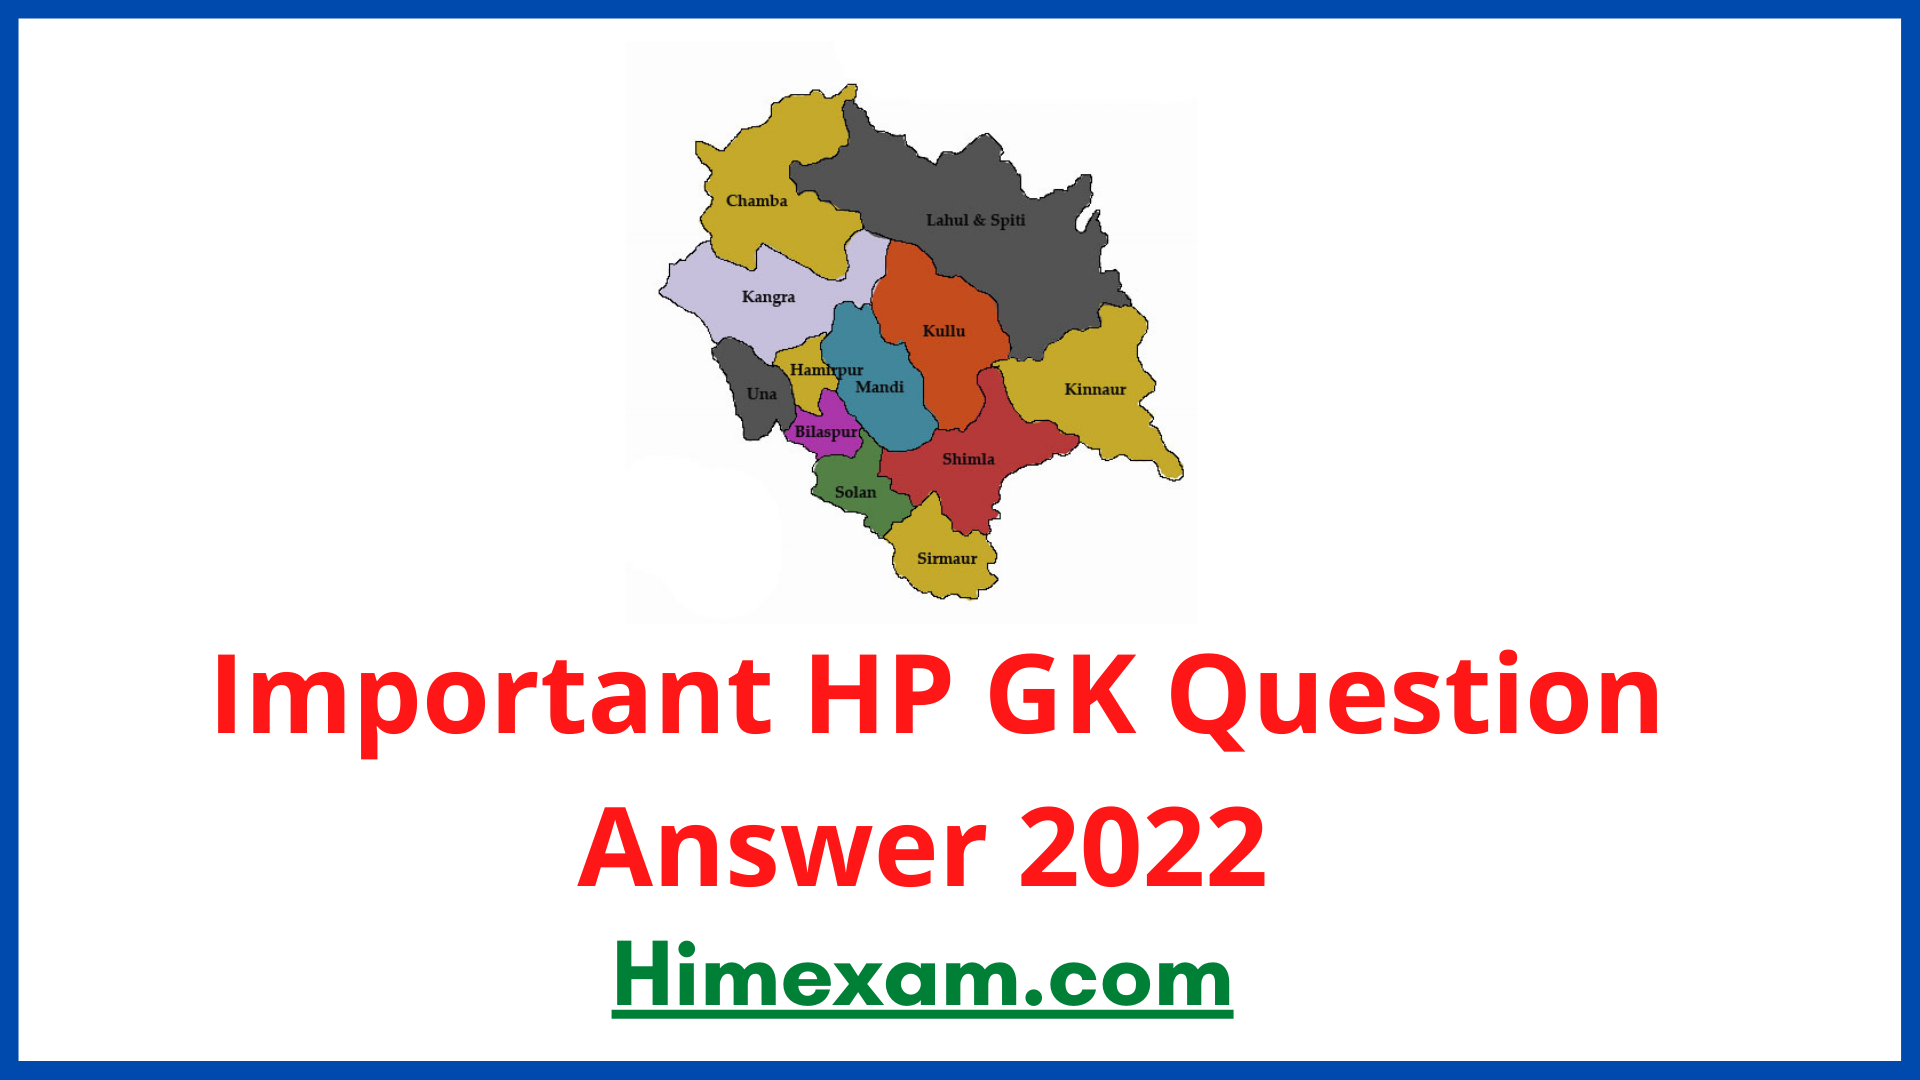 Important HP GK Question Answer 2022